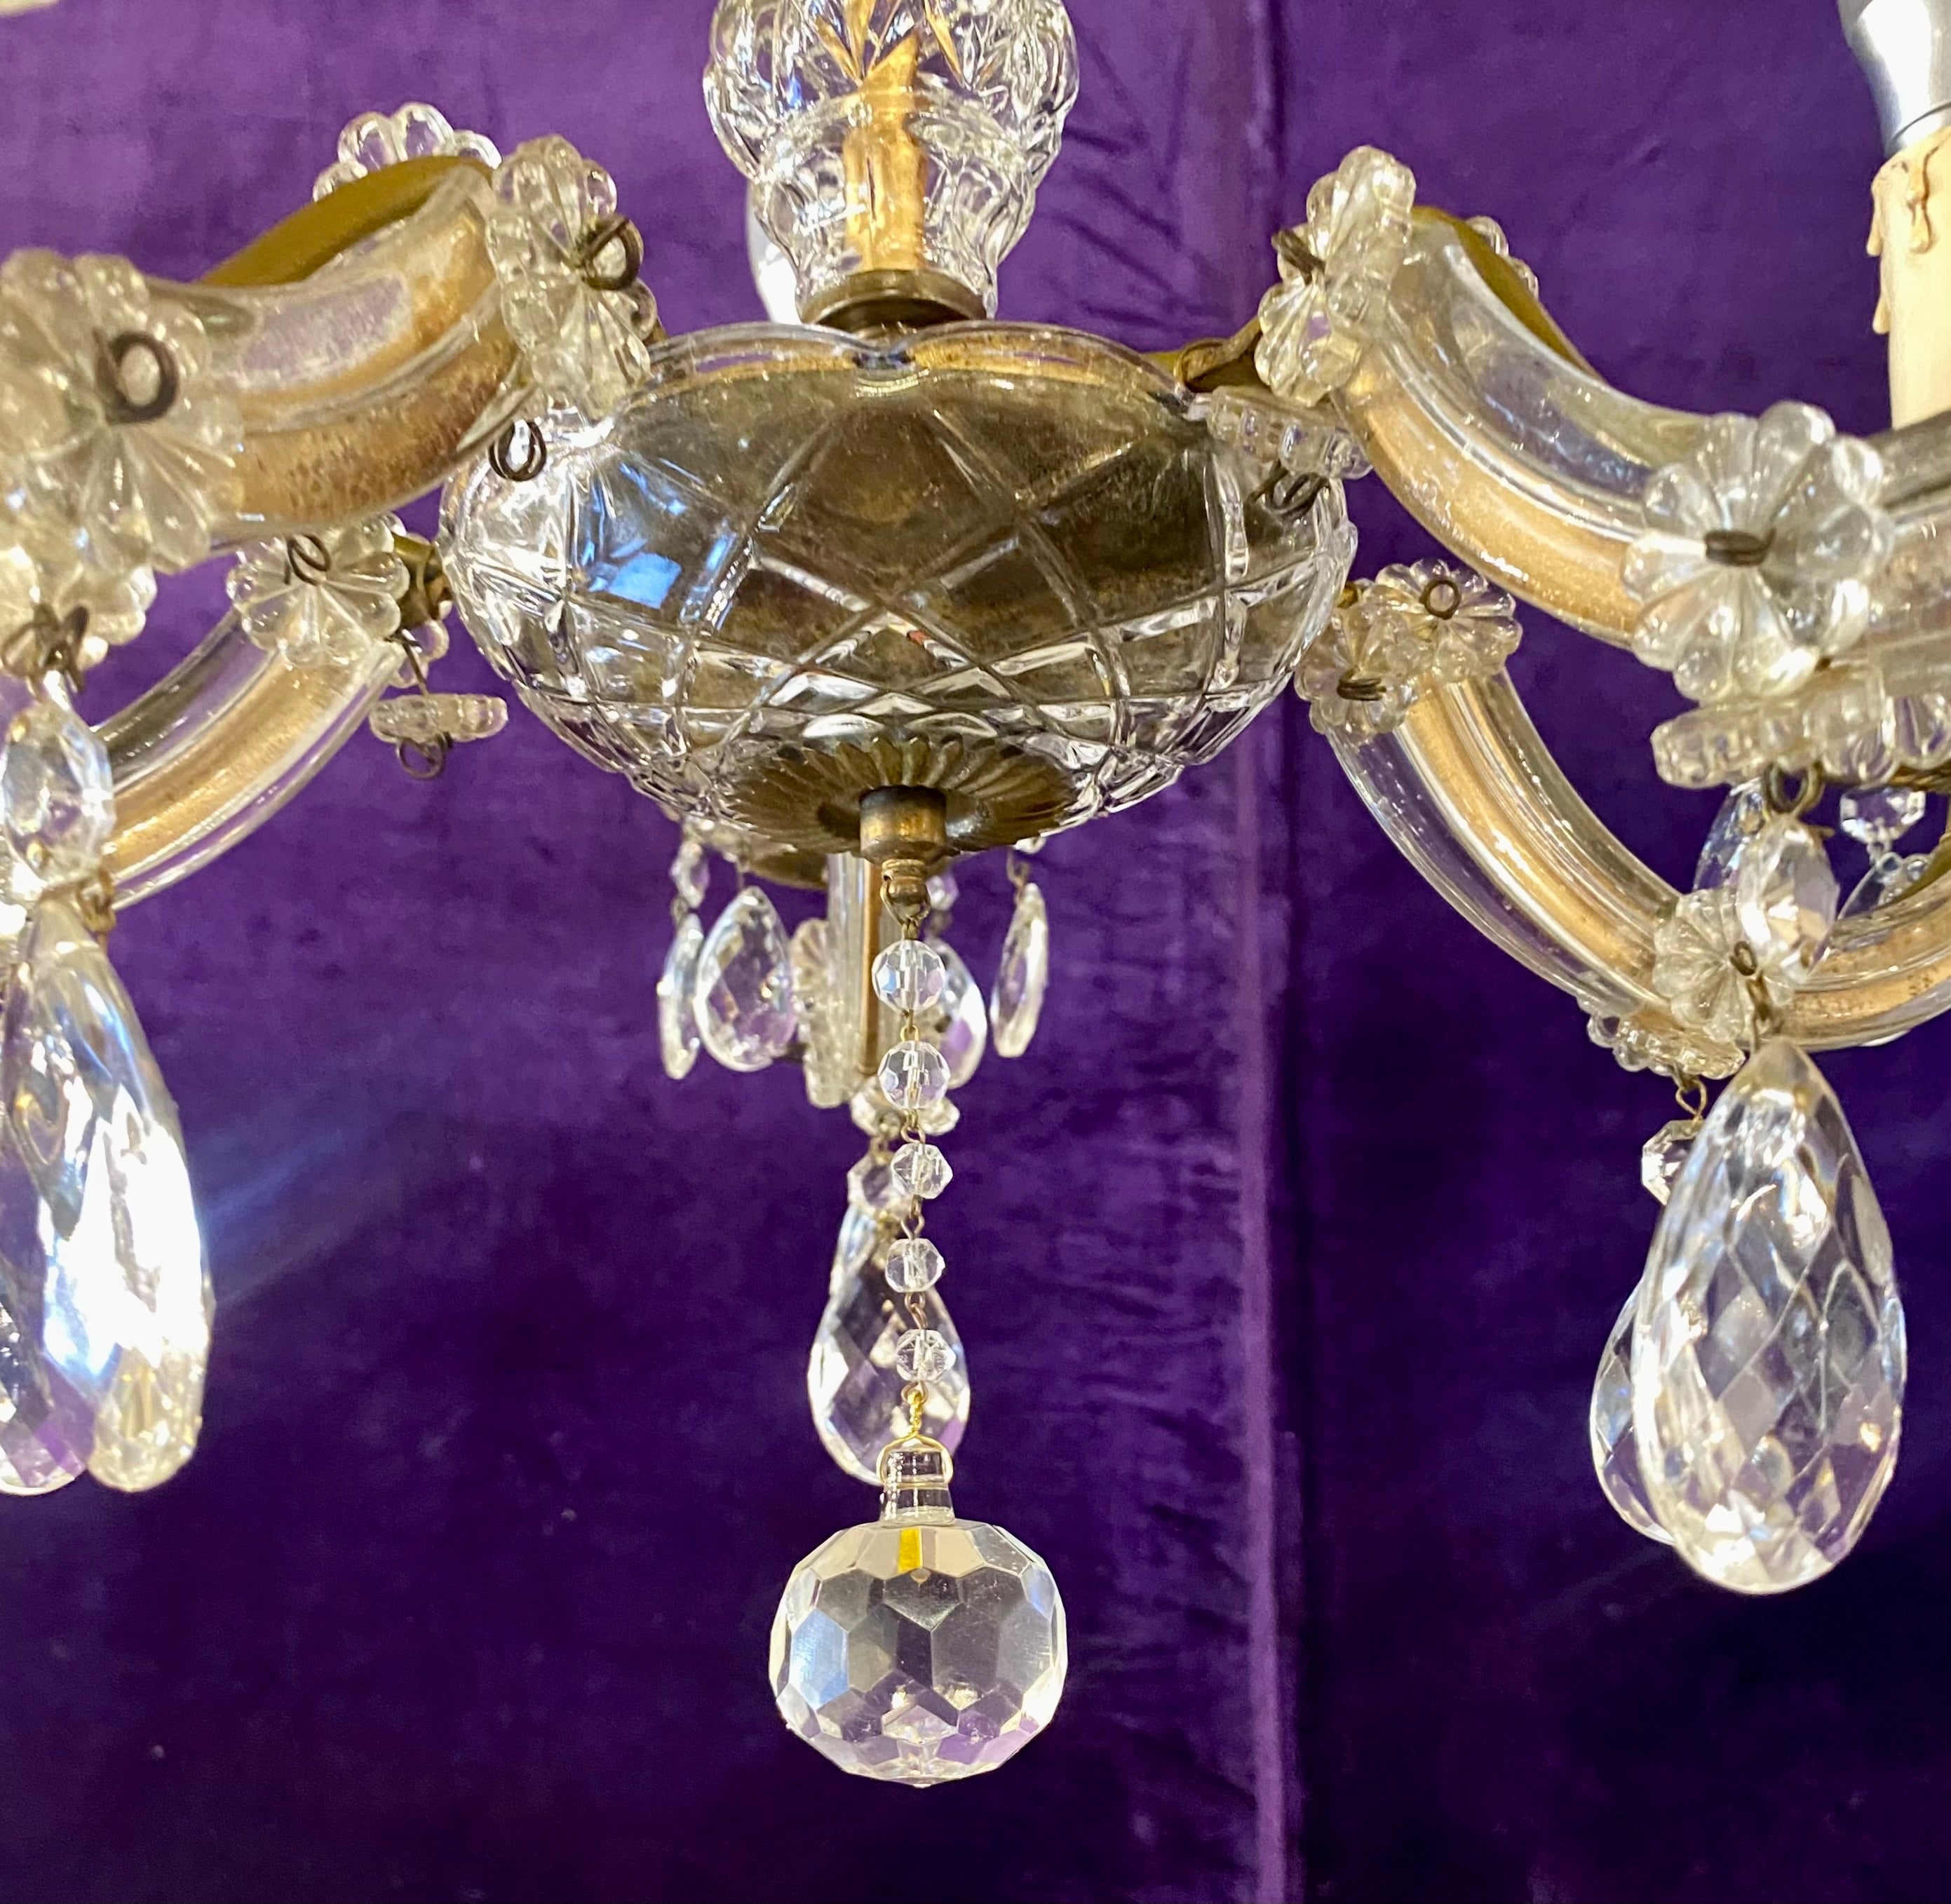 Antique Maria Theresa Chandelier with Original Crystal Ball